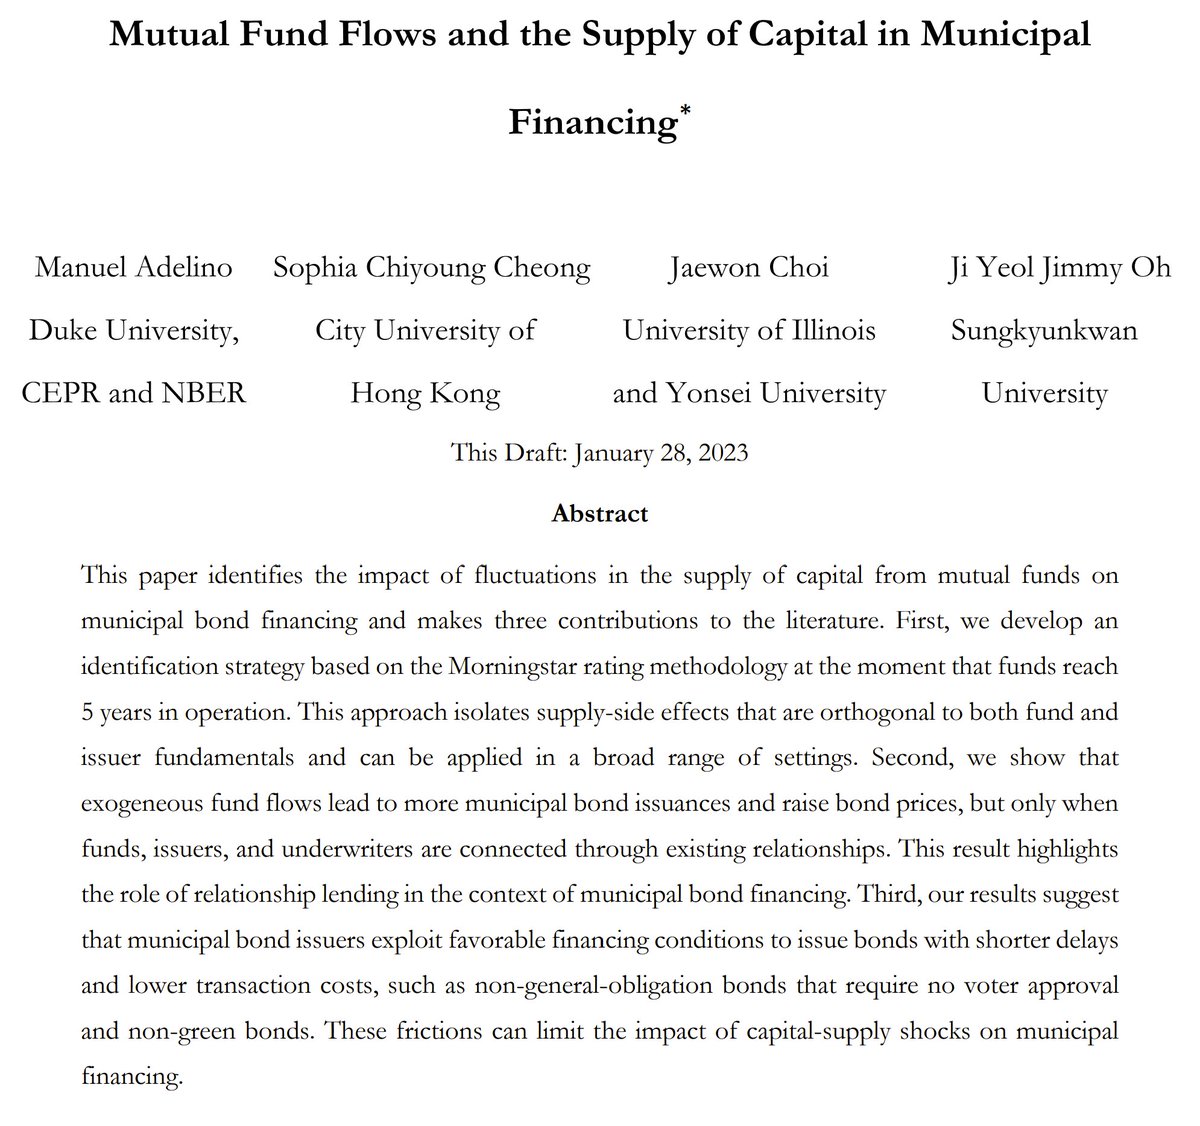 A new Virtual Municipal Finance Workshop today at 11am ET! Ji Yeol Jimmy Oh of SKKU will present 'Mutual Fund Flows and the Supply of Capital in Municipal Financing' (with Manuel Adelino, Sophia Chiyoung Cheong, and Jaewon Choi) Paper + Info: muni-workshop.com